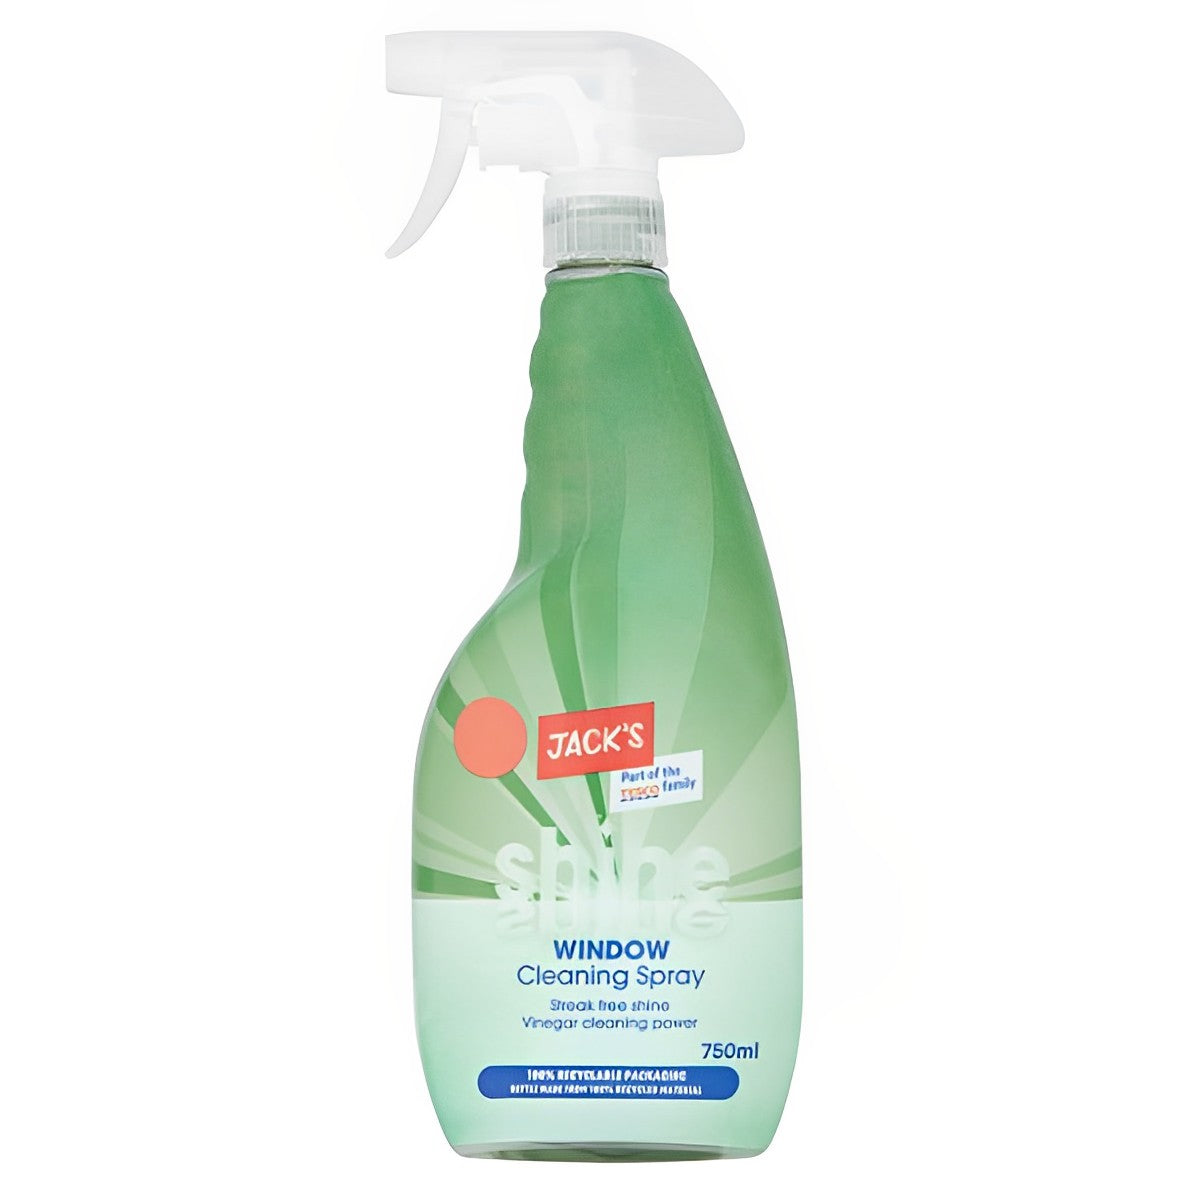 Jack's - Shine Window Cleaning Spray - 750ml - Continental Food Store